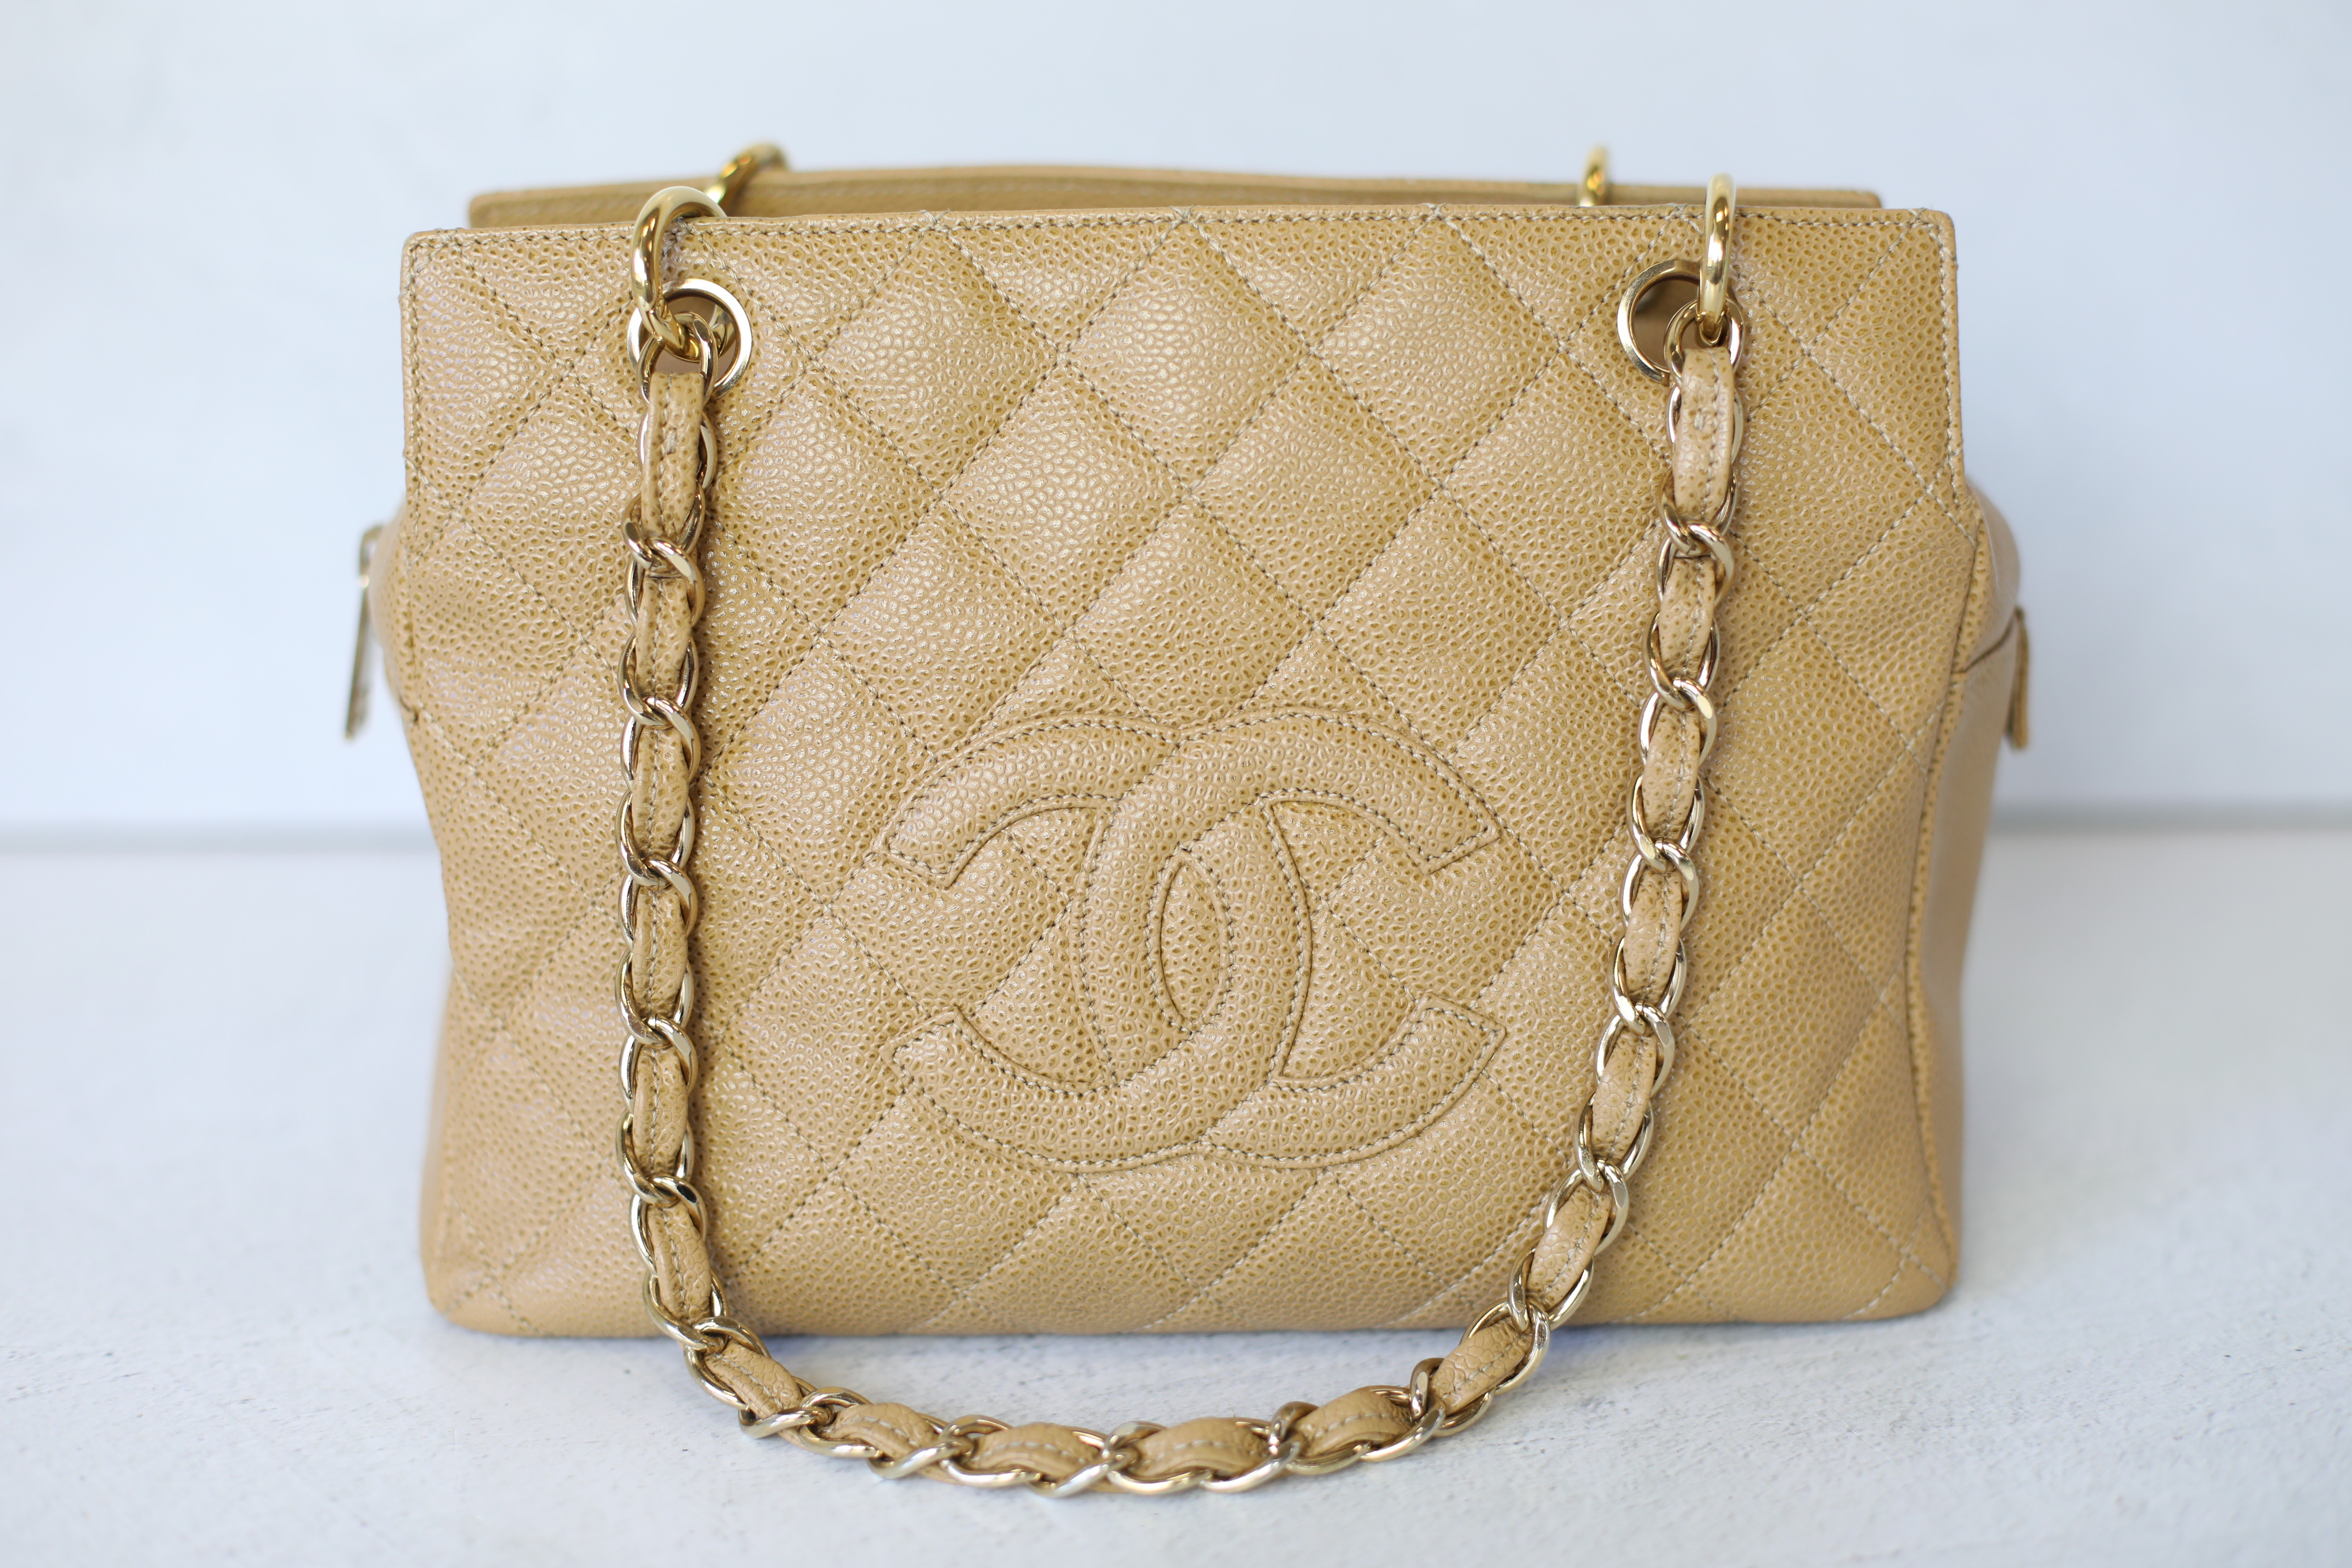 Chanel Petite Timeless Tote PTT, Beige Caviar with Gold Hardware, Preowned  in Dustbag WA001 - Julia Rose Boston